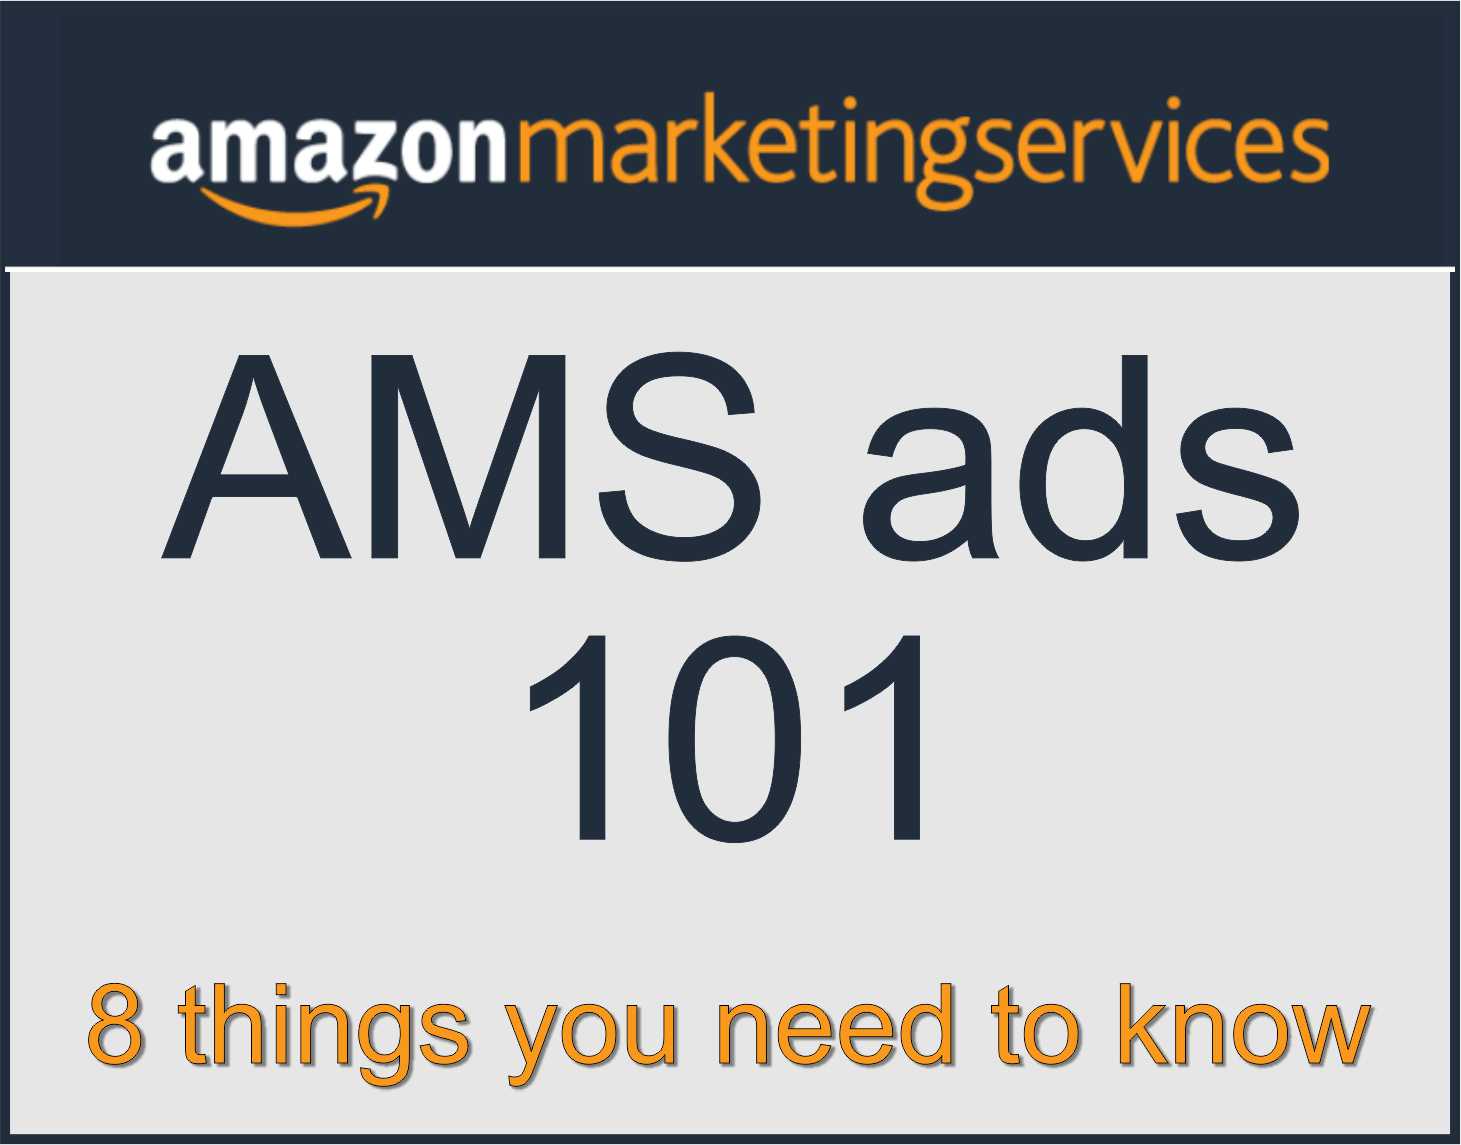 AMS ads 101: 8 thing you need to know